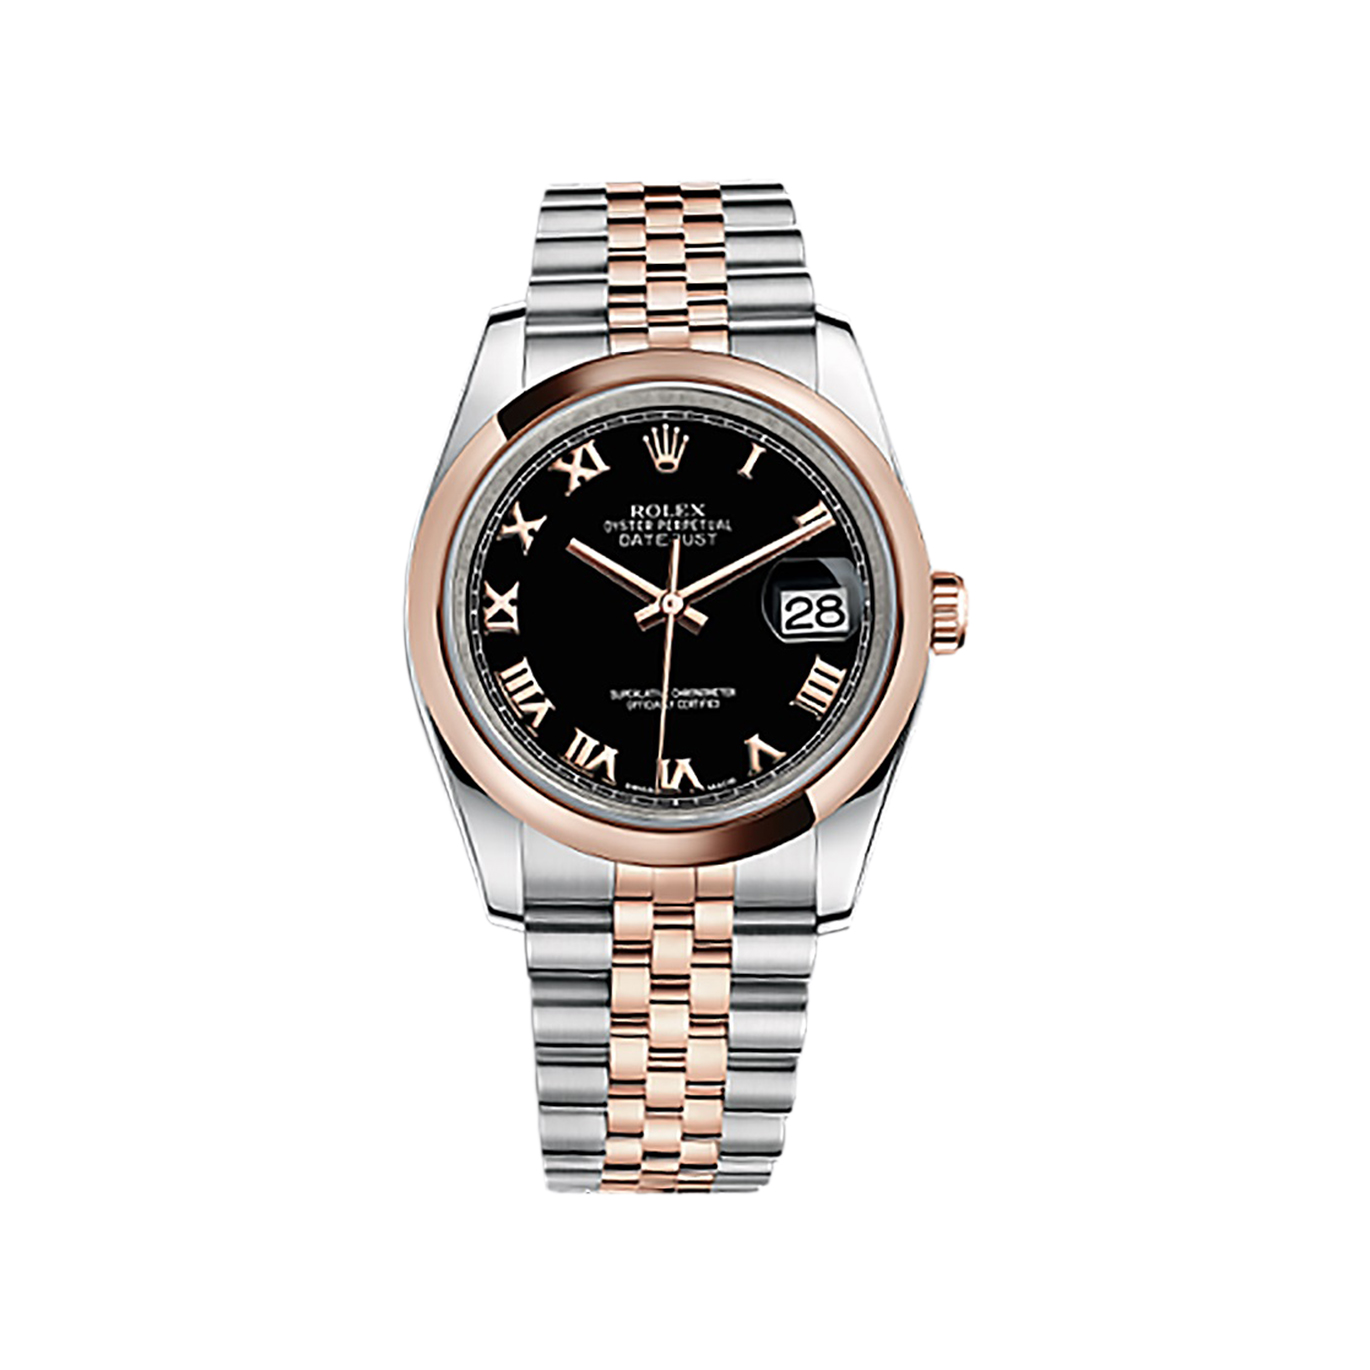 Datejust 36 116201 Rose Gold & Stainless Steel Watch (Black) - Click Image to Close